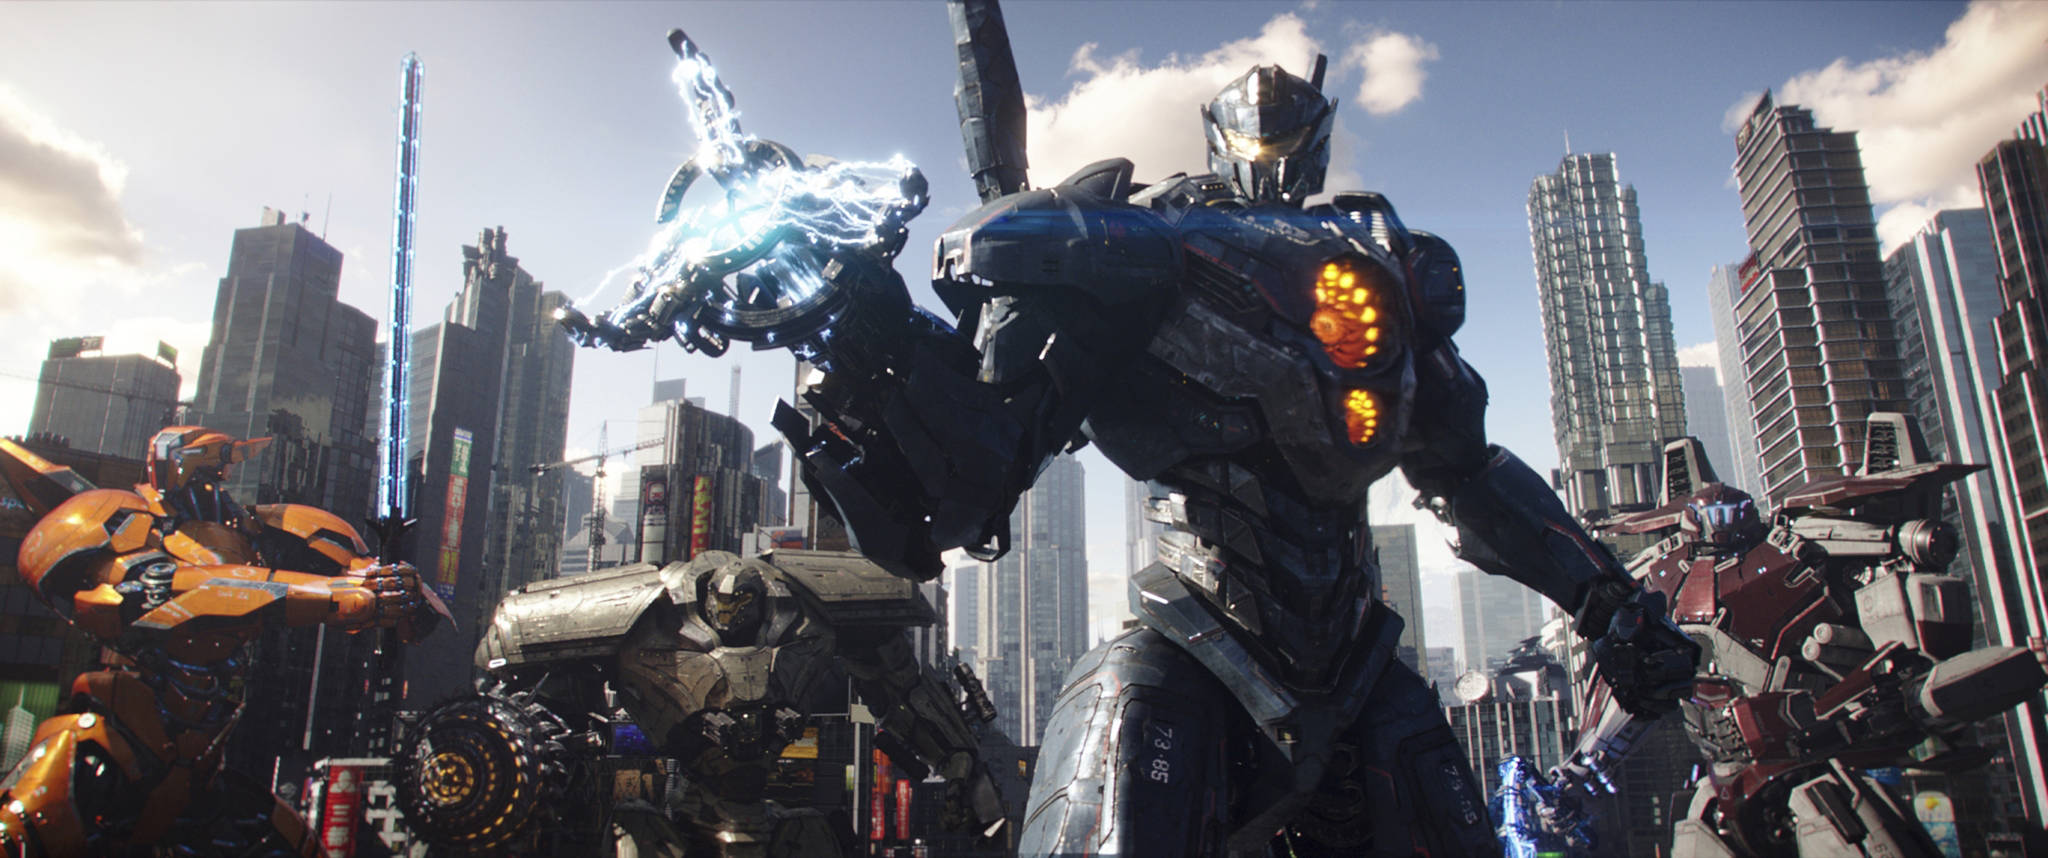 This image released by Universal Pictures shows a scene from “Pacific Rim Uprising.” (Legendary Pictures/Universal Pictures via AP)